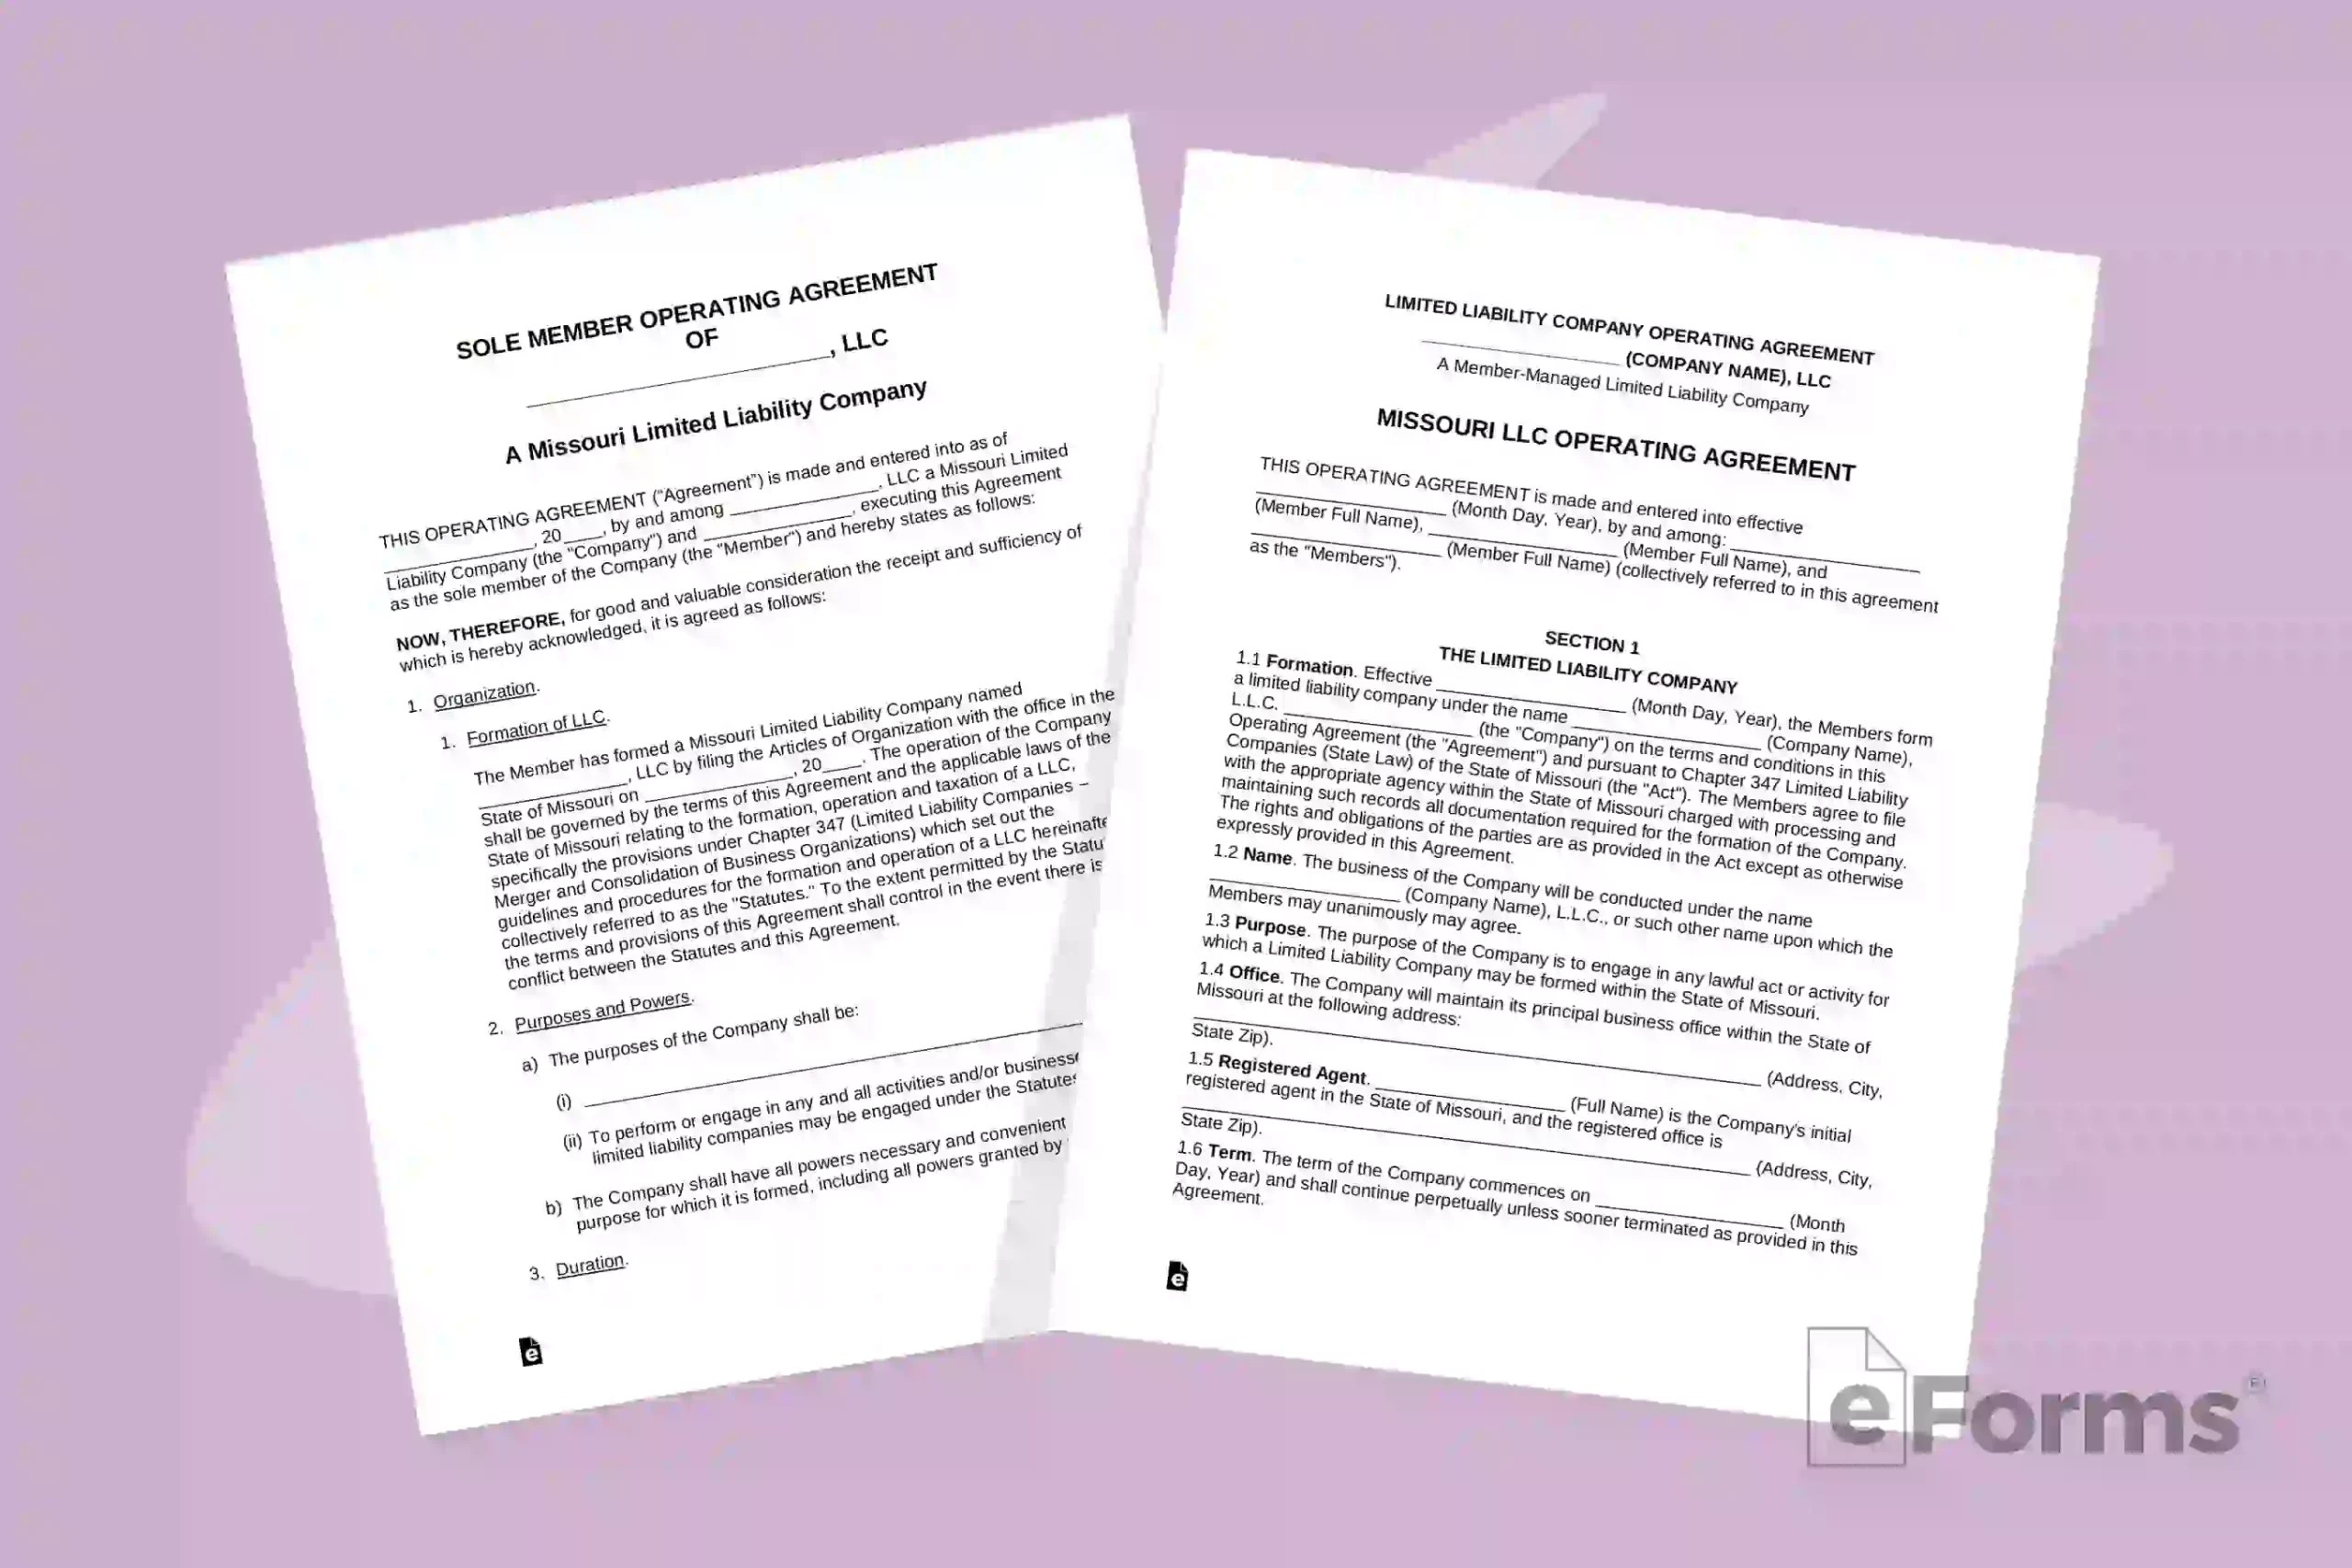 Image of a pair of Operating Agreement documents.